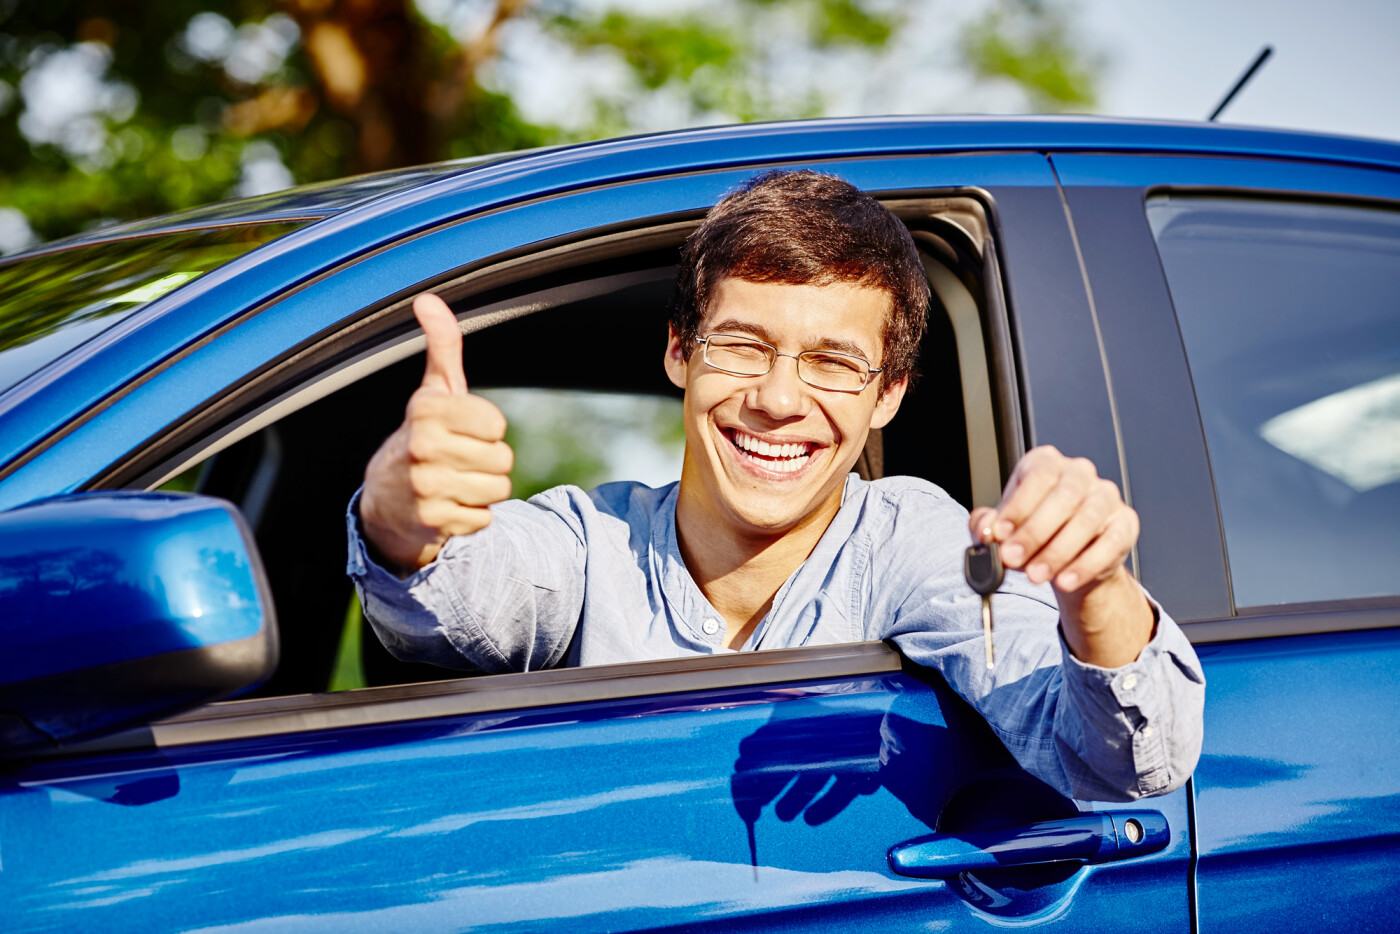 A guy sitting in a car, smiling while showing his car key and giving a thumbs up